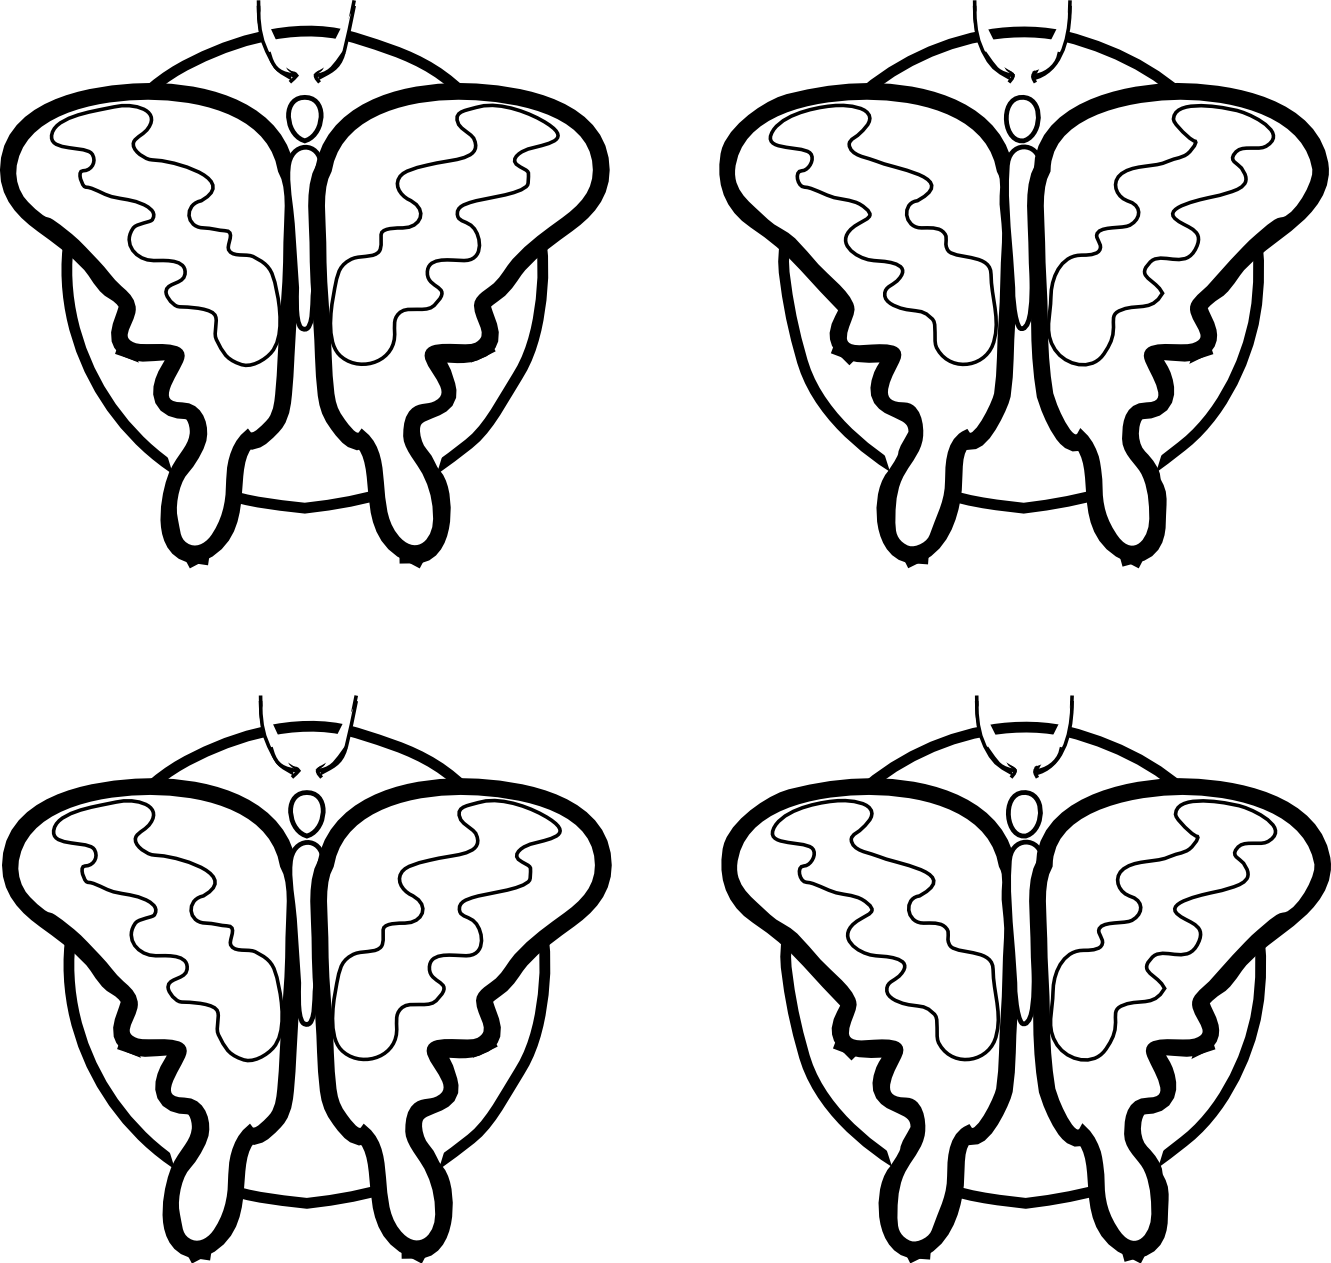 Other Popular Clip Arts - 4 Butterfly Clipart Black And White (1331x1263)